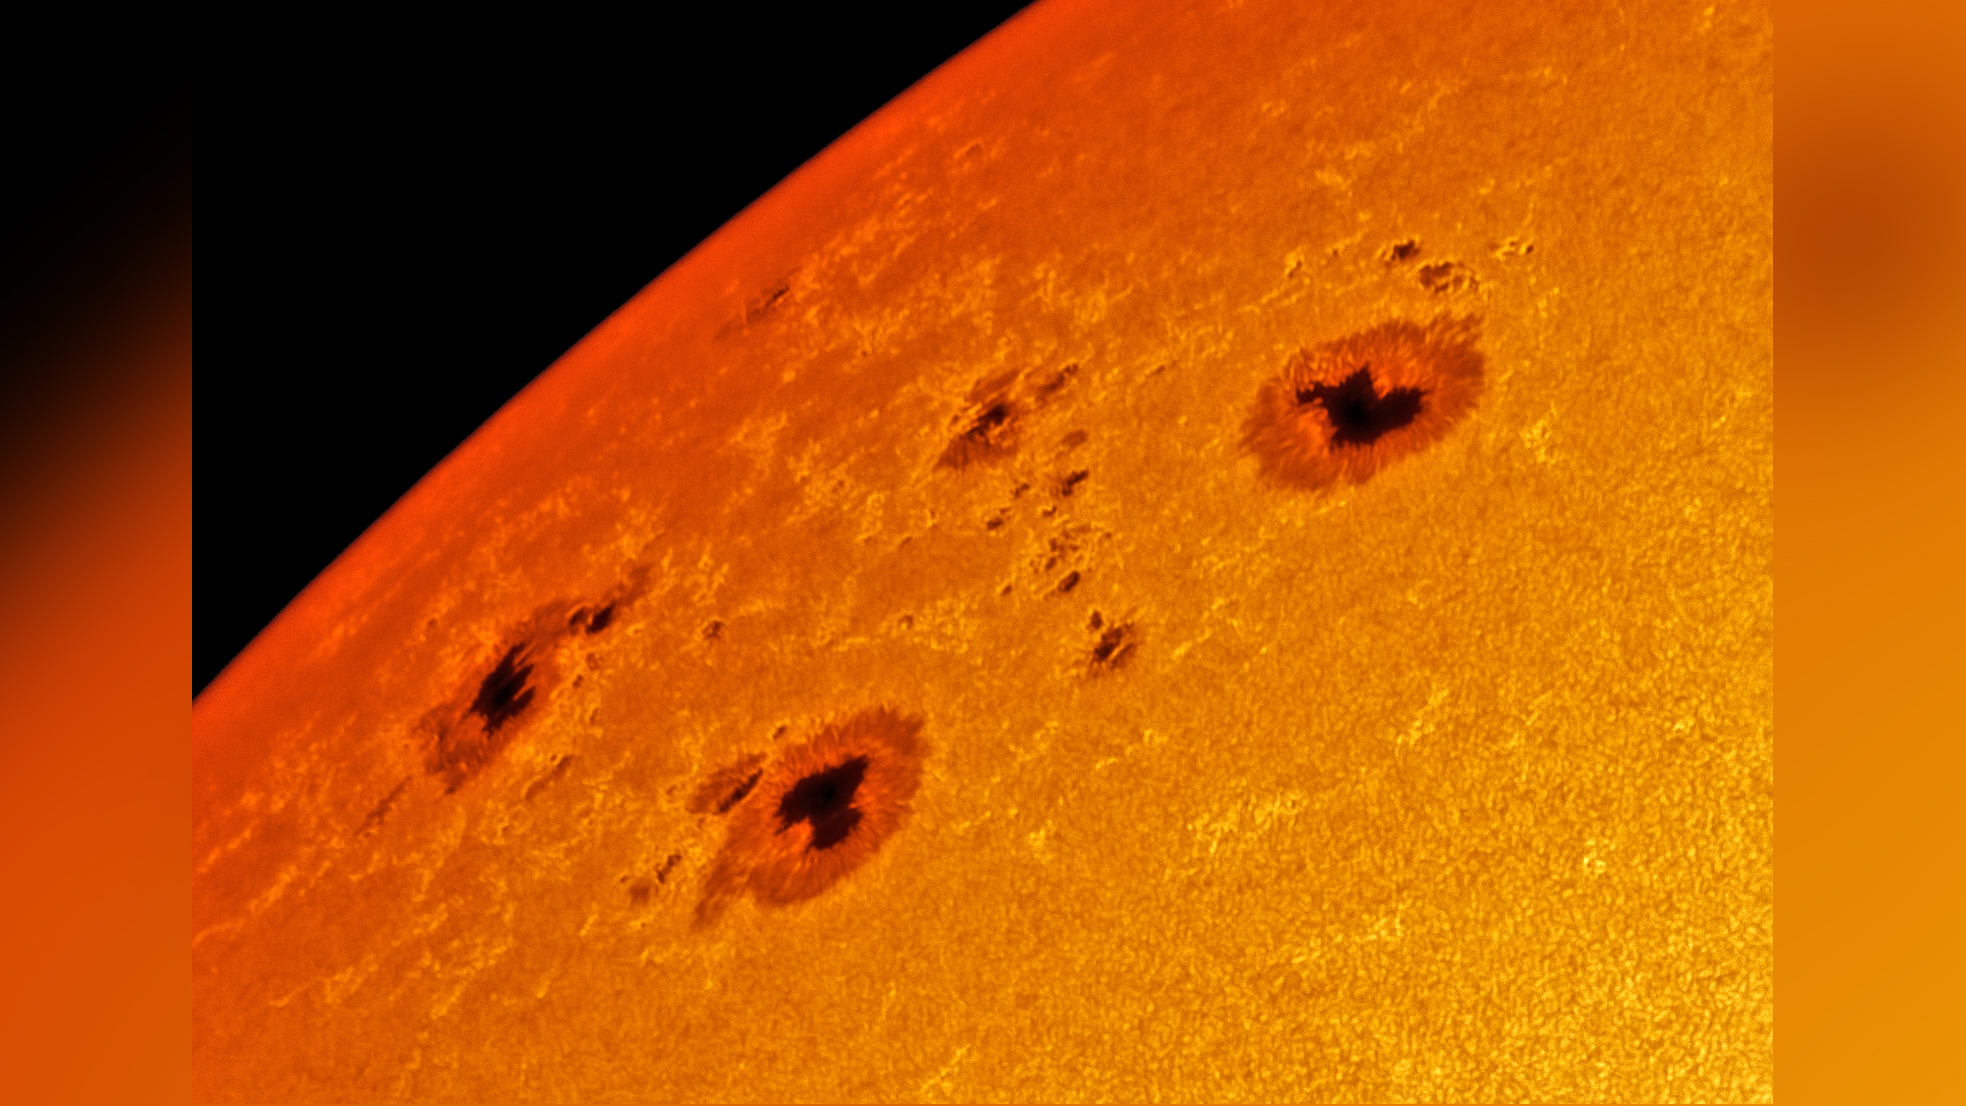 The two massive sunspot clusters, known as AR 2993 and AR 2994, became visible a few days ago at the Sun's northeastern rim, after becoming active while still occluded by the solar disk.